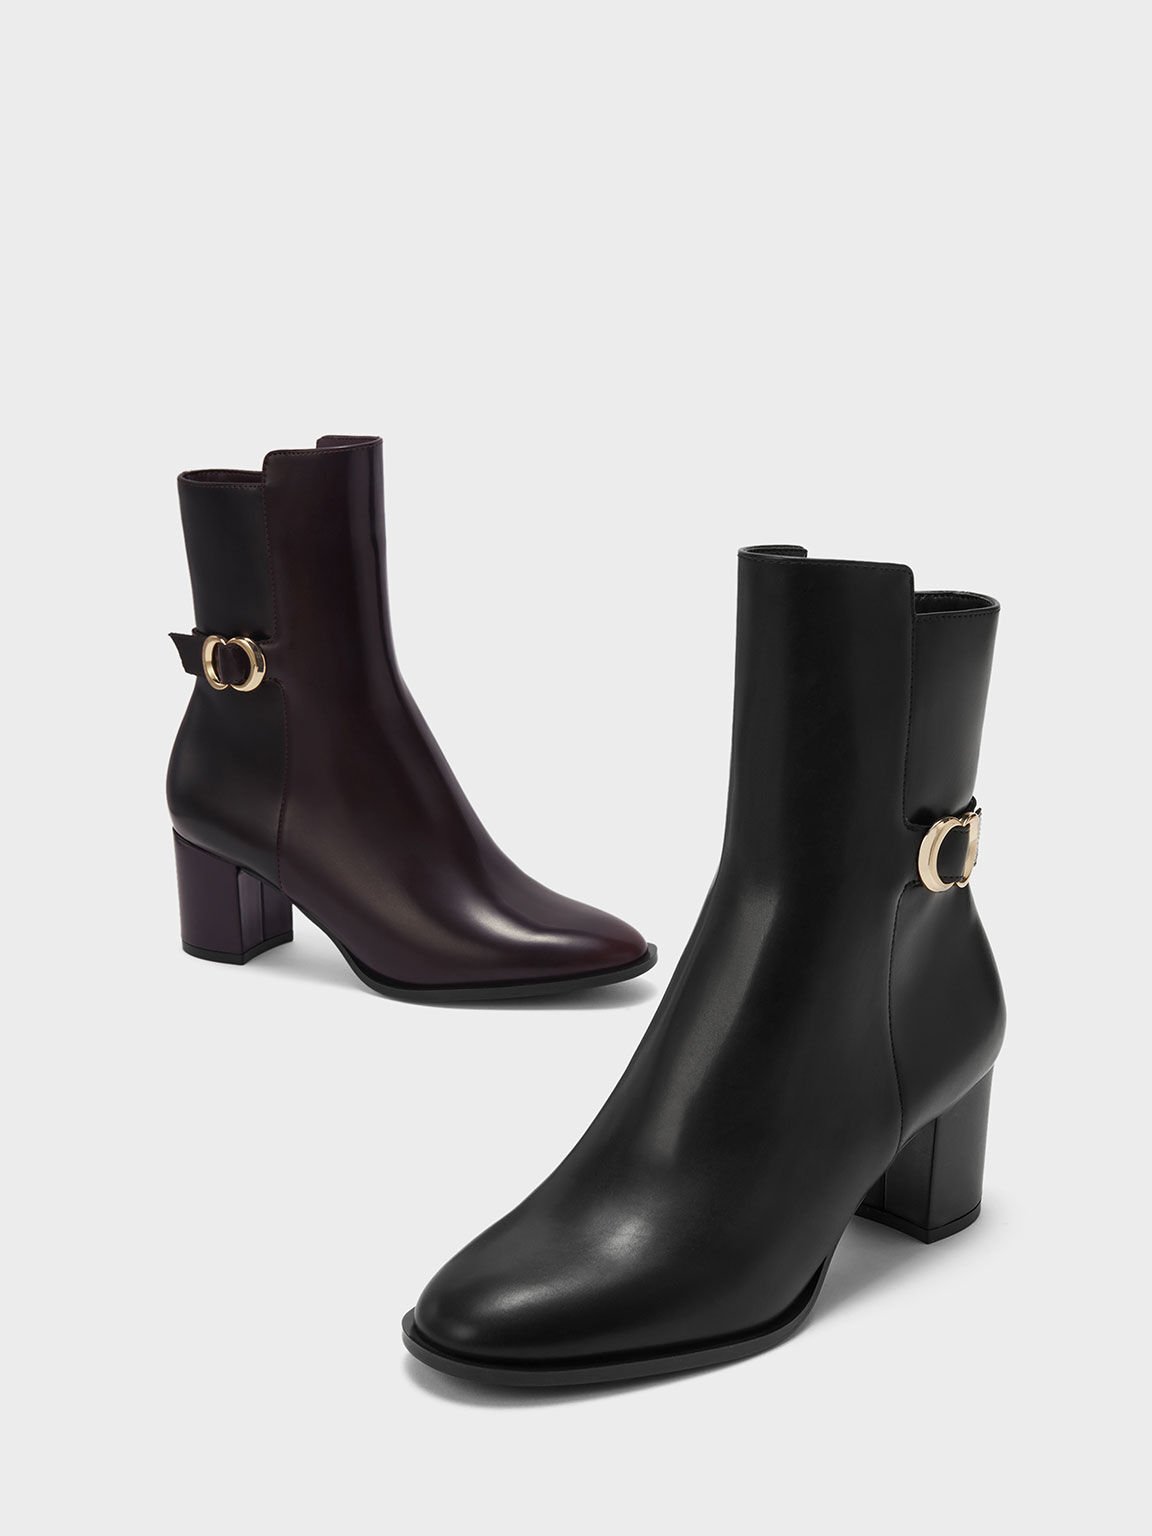 Metallic Accent Ankle Boots, Burgundy, hi-res